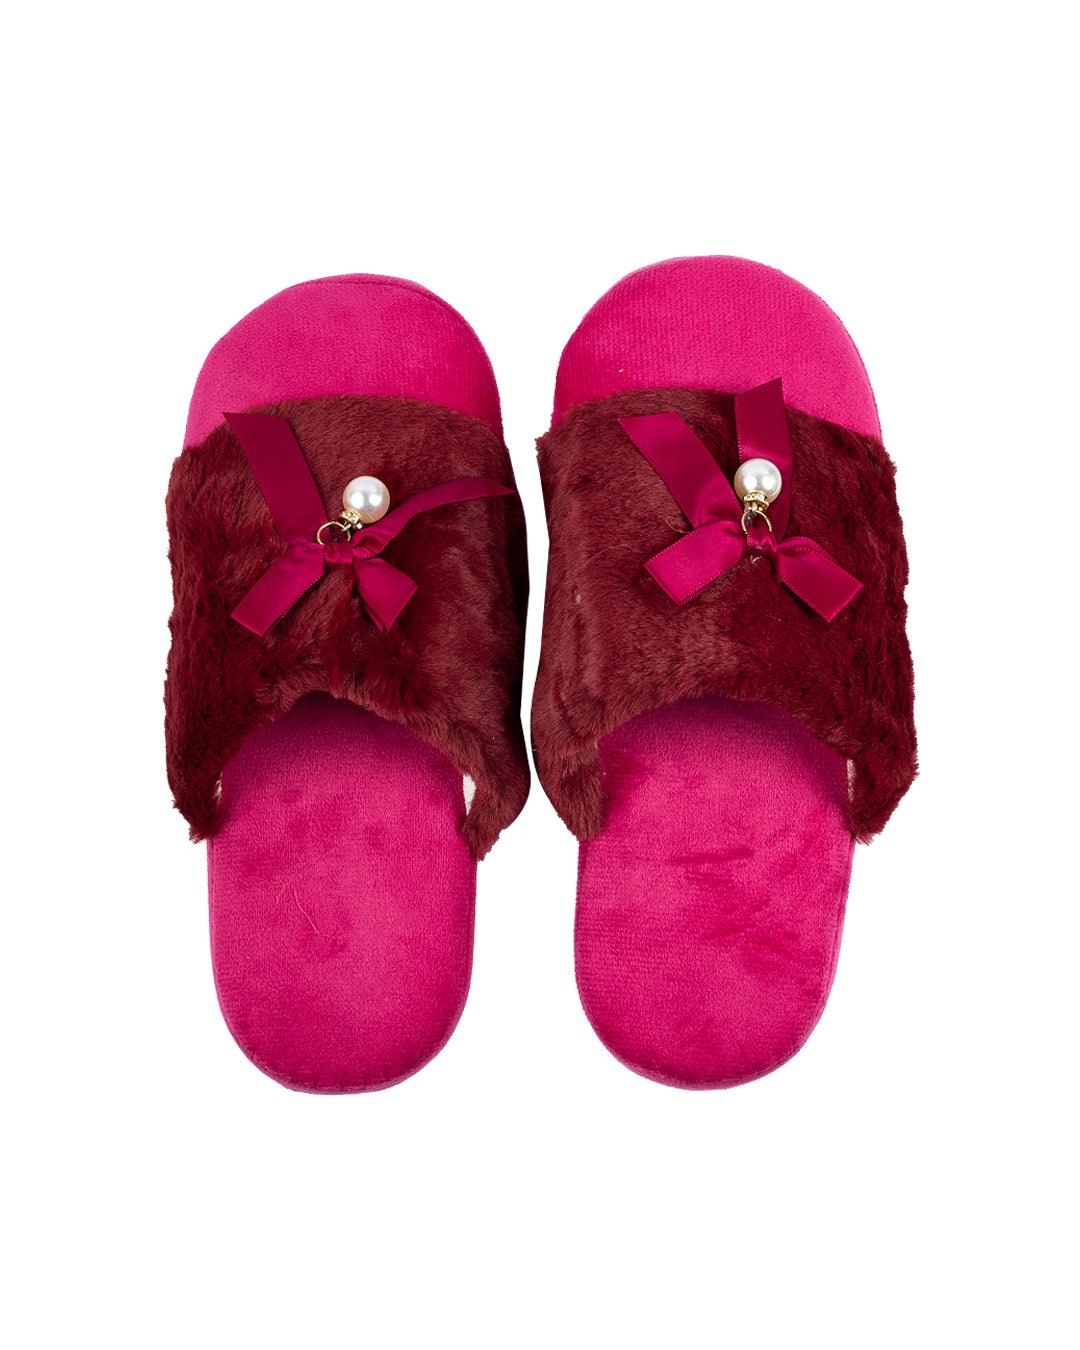 Donati Bedroom Fluffy Slippers, Pink, Polyester